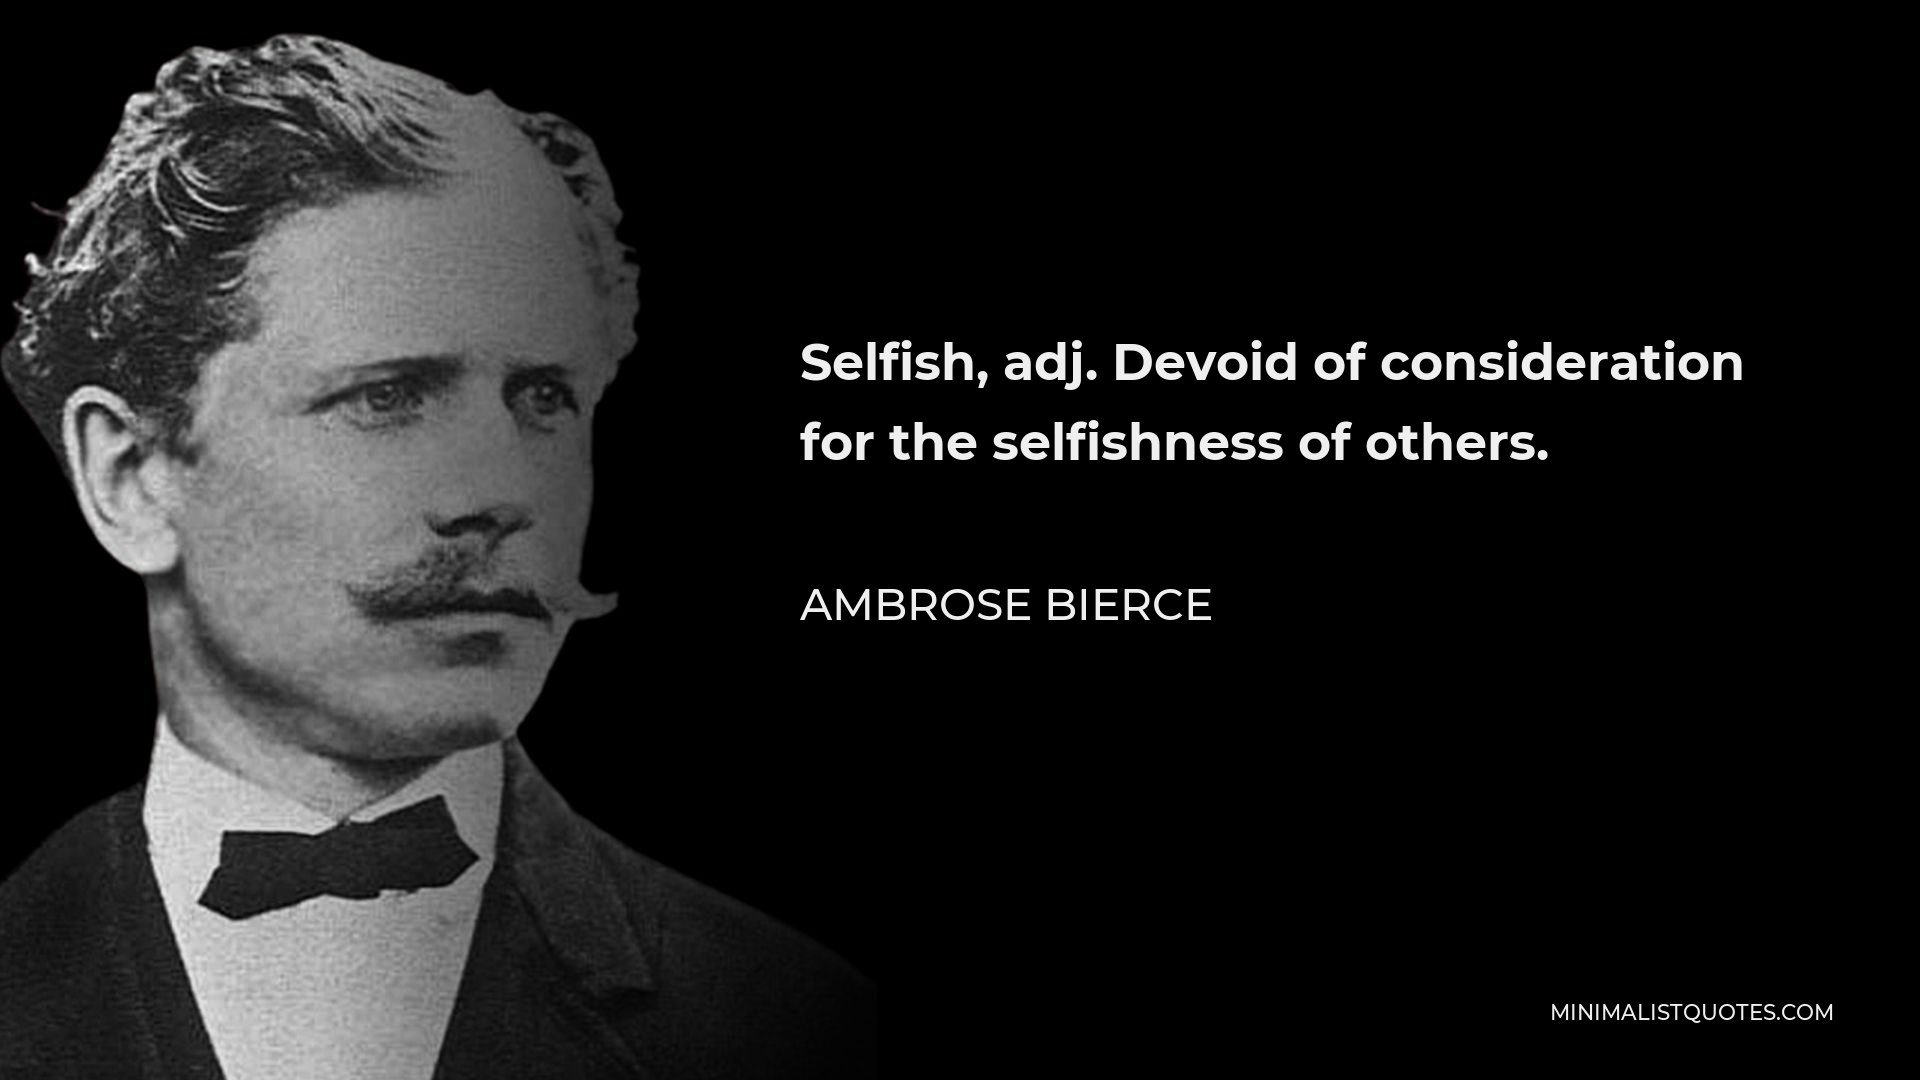 Ambrose Bierce Quote - Selfish, adj. Devoid of consideration for the selfishness of others.